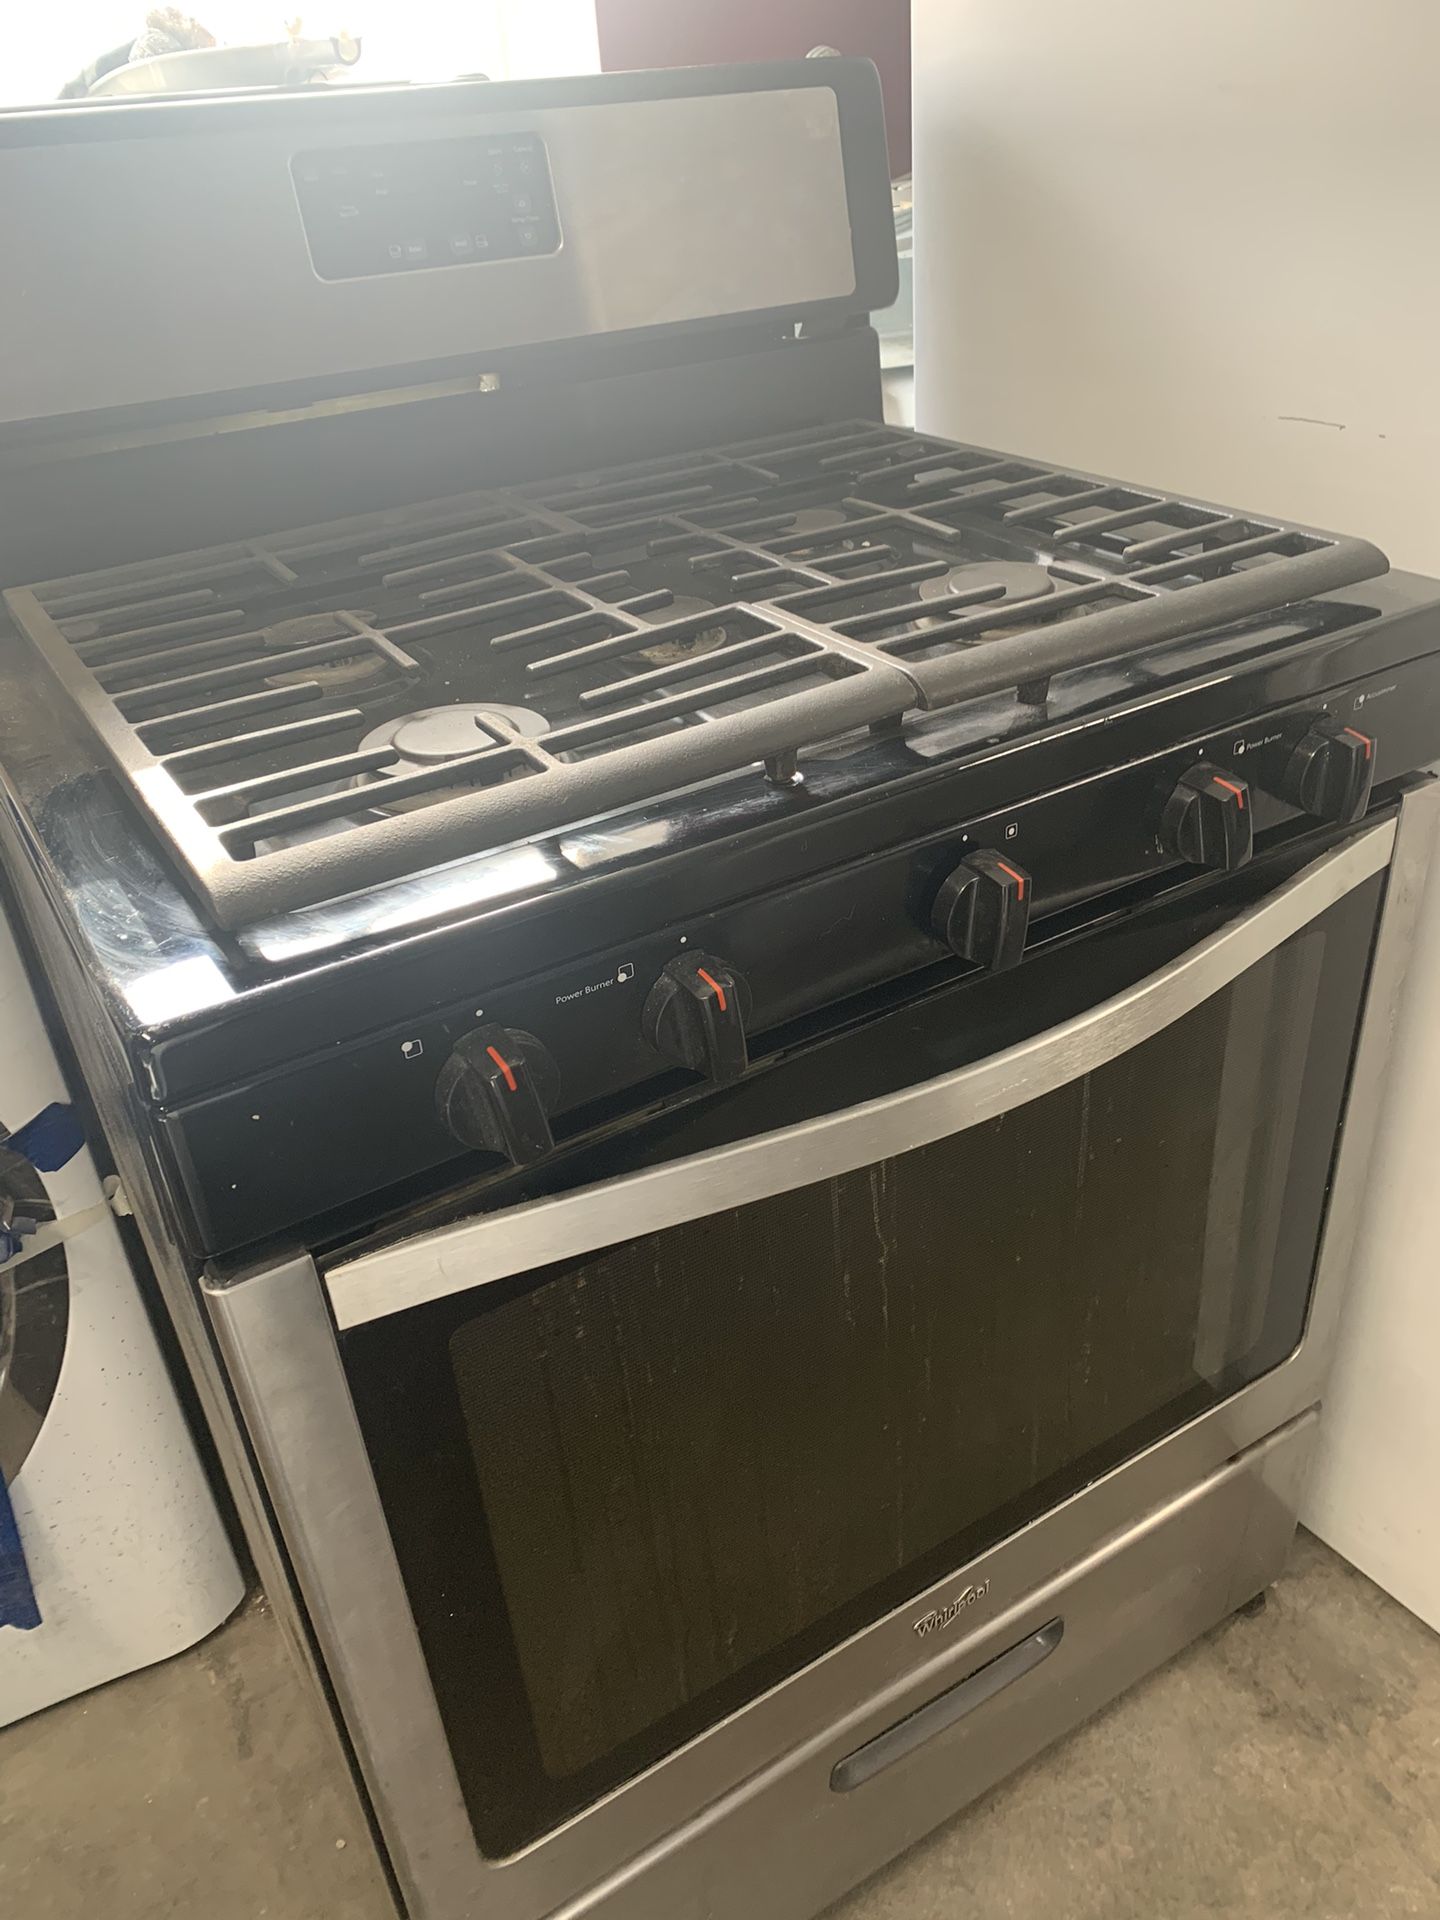 Stove Gas Stainless Stills Whirlpool Works Good Condition Good Warranty Gas Stainless Stills 